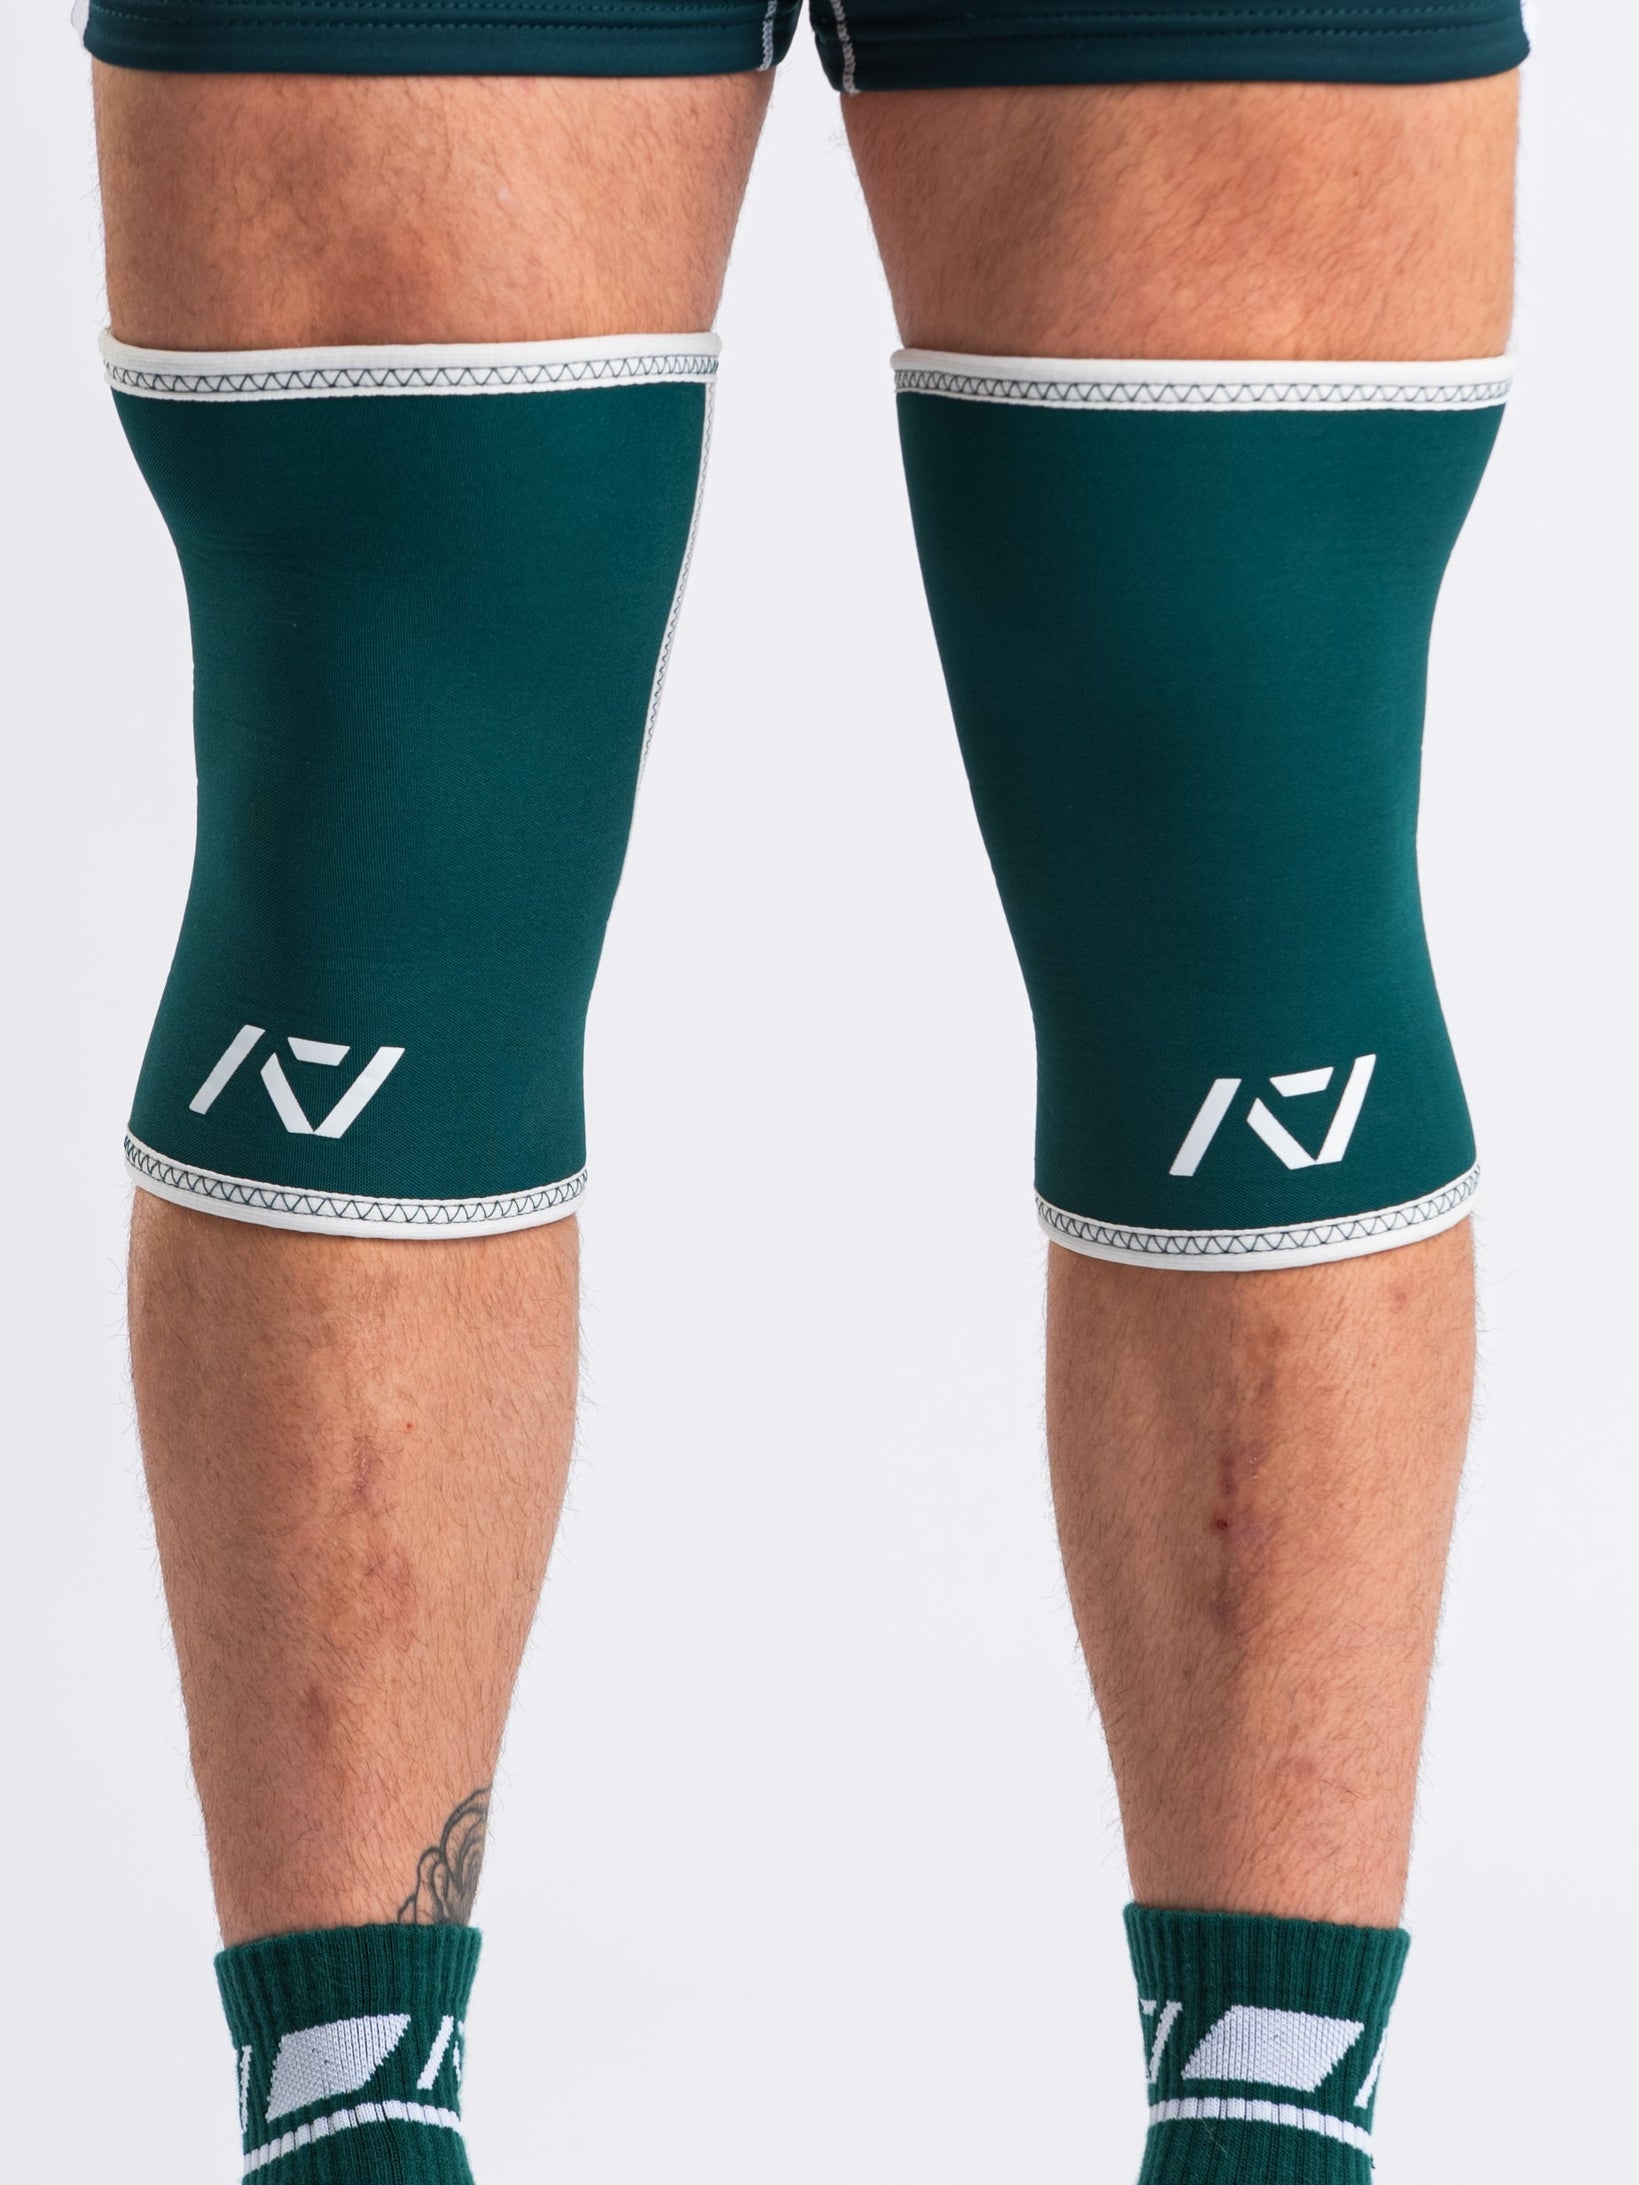 A7 IPF Approved Hourglass Knee Sleeves feature an hourglass-shaped centre taper fit to help provide knee compression while maintaining proper tightness around the calf and quad, offered in three stiffnesses (Flexi, Stiff and Rigor Mortis). Shop the full A7 Powerlifting IPF Approved Equipment collection. The IPF Approved Kit includes Powerlifting Singlet, A7 Meet Shirt, A7 Zebra Wrist Wraps and A7 Deadlift Socks. Genouill�res powerlifting shipping to France, Spain, Ireland, Germany, Italy, Sweden and EU.